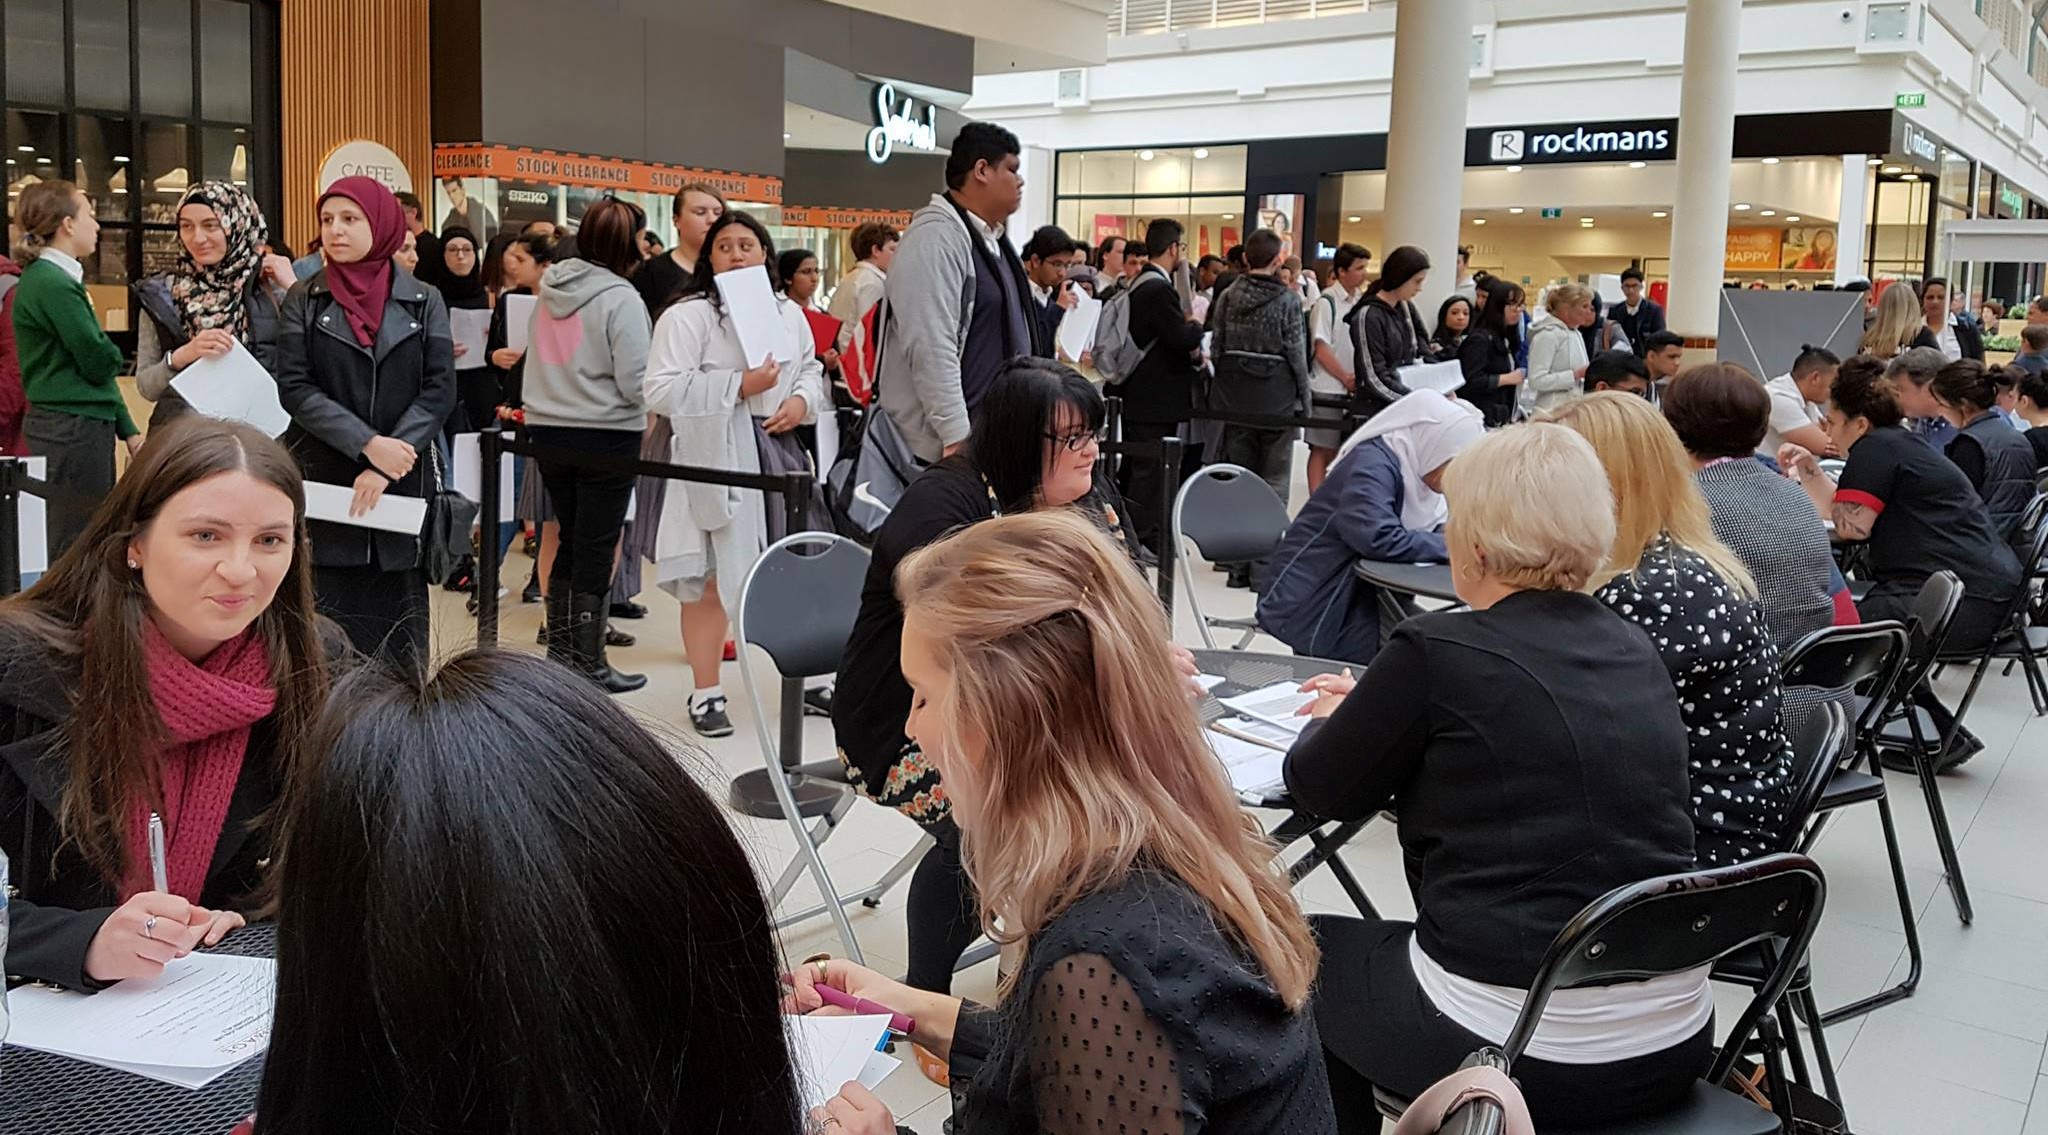 Photo taken inside a shopping centre. Foreground shows people sitting at separate tables, some writing on pieces of paper. In the background, people are forming a queue.